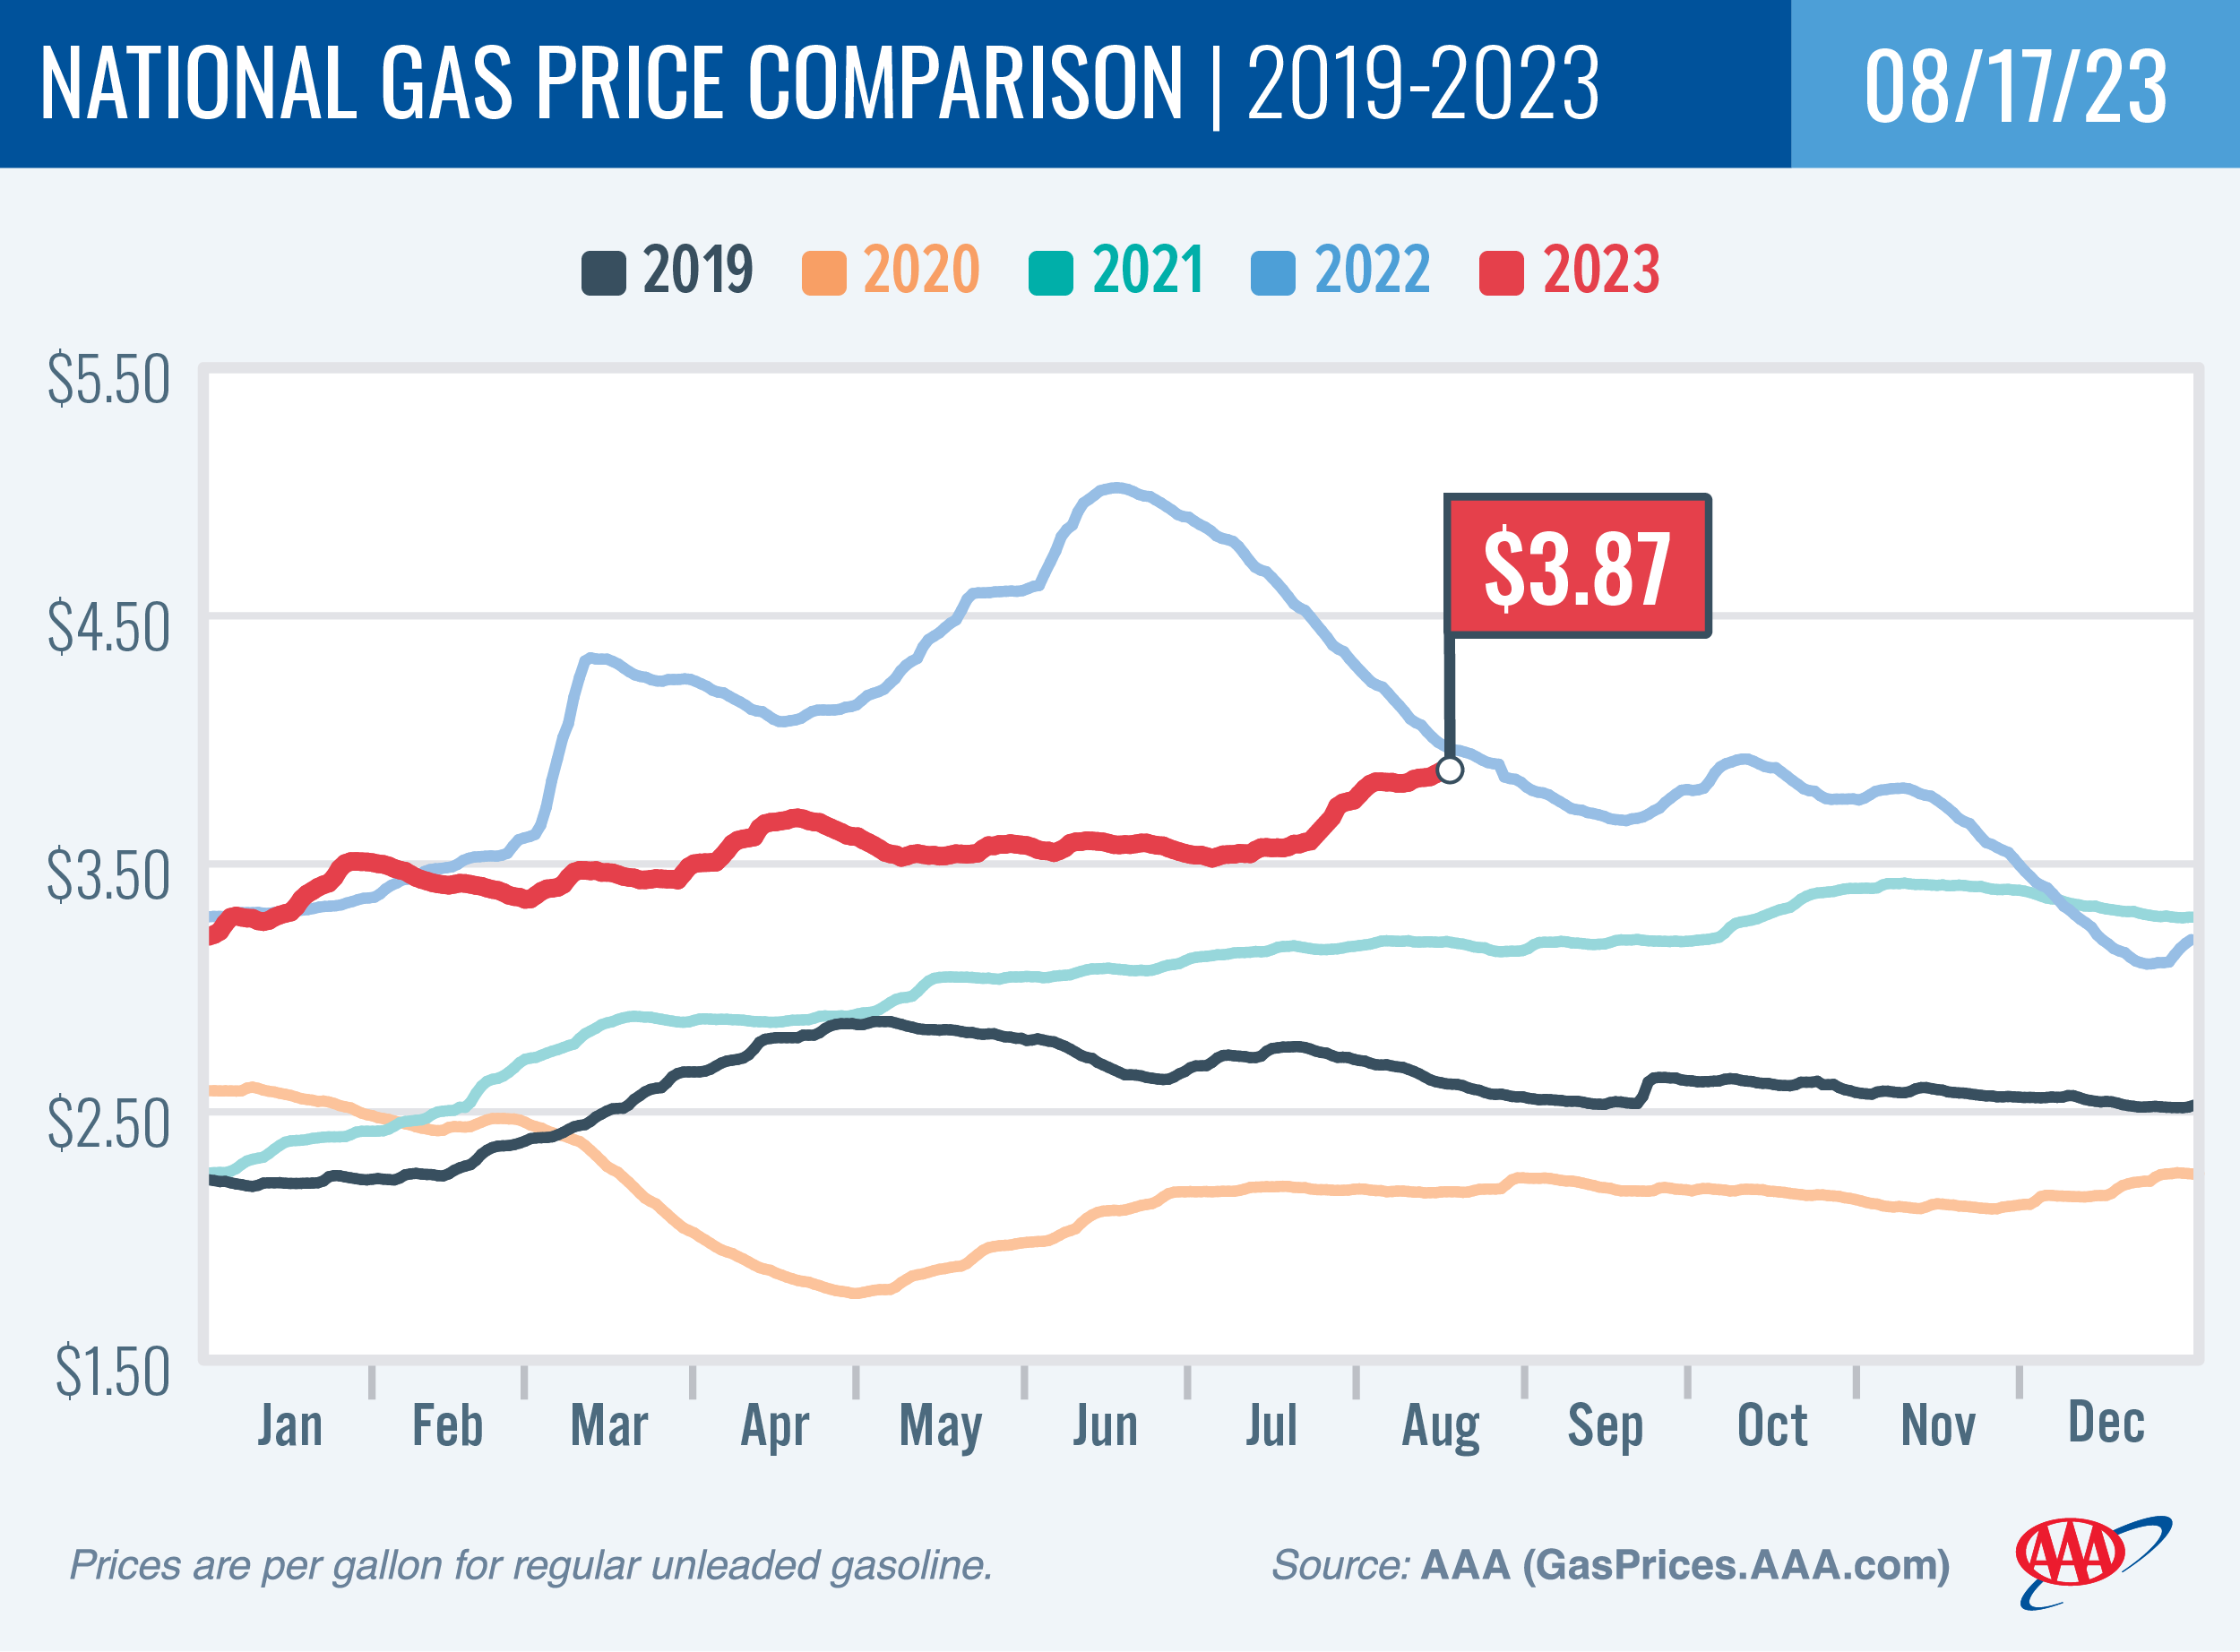 National Gas Price Comparison for August 17, 2023